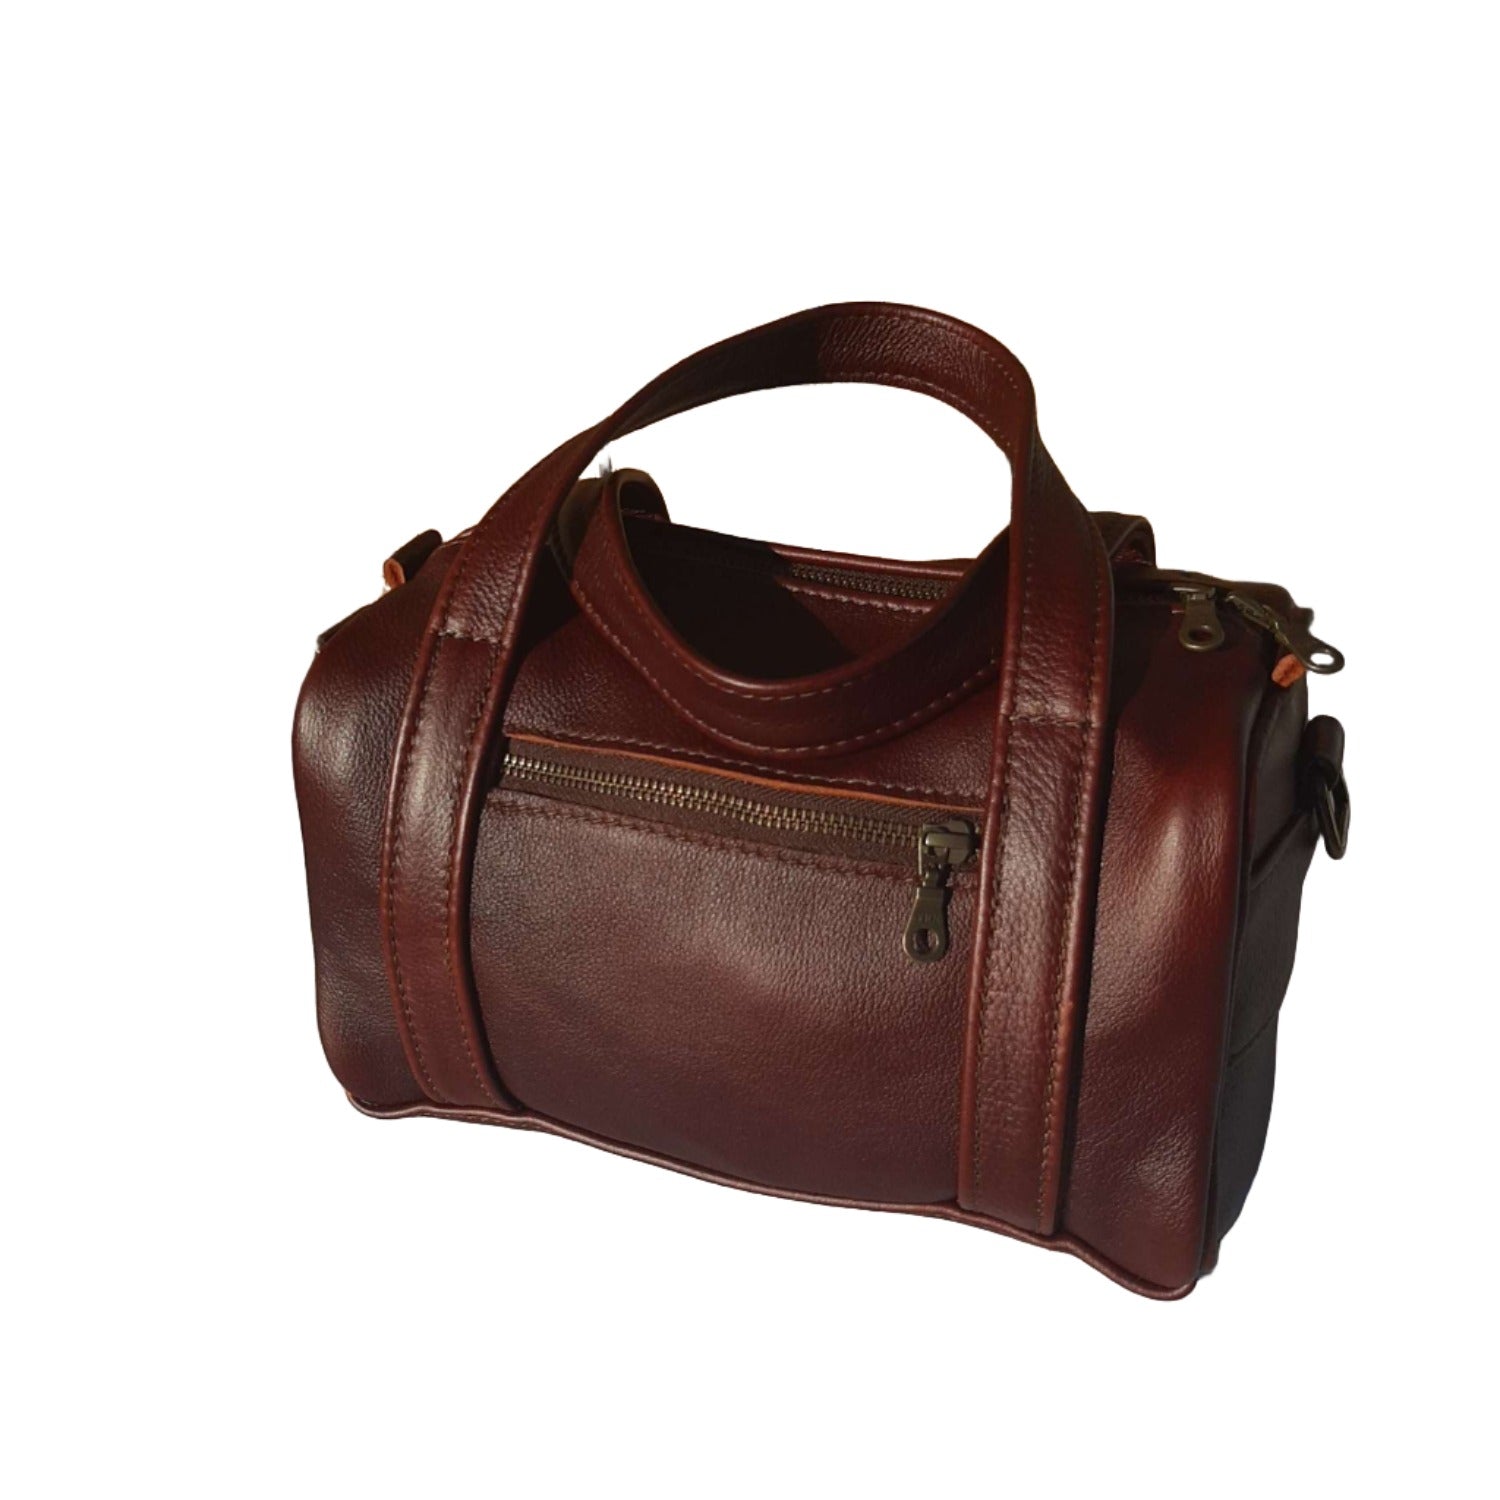 Alex Bathroom bags with Strap in dark tan colour  from Cape Masai Leather 